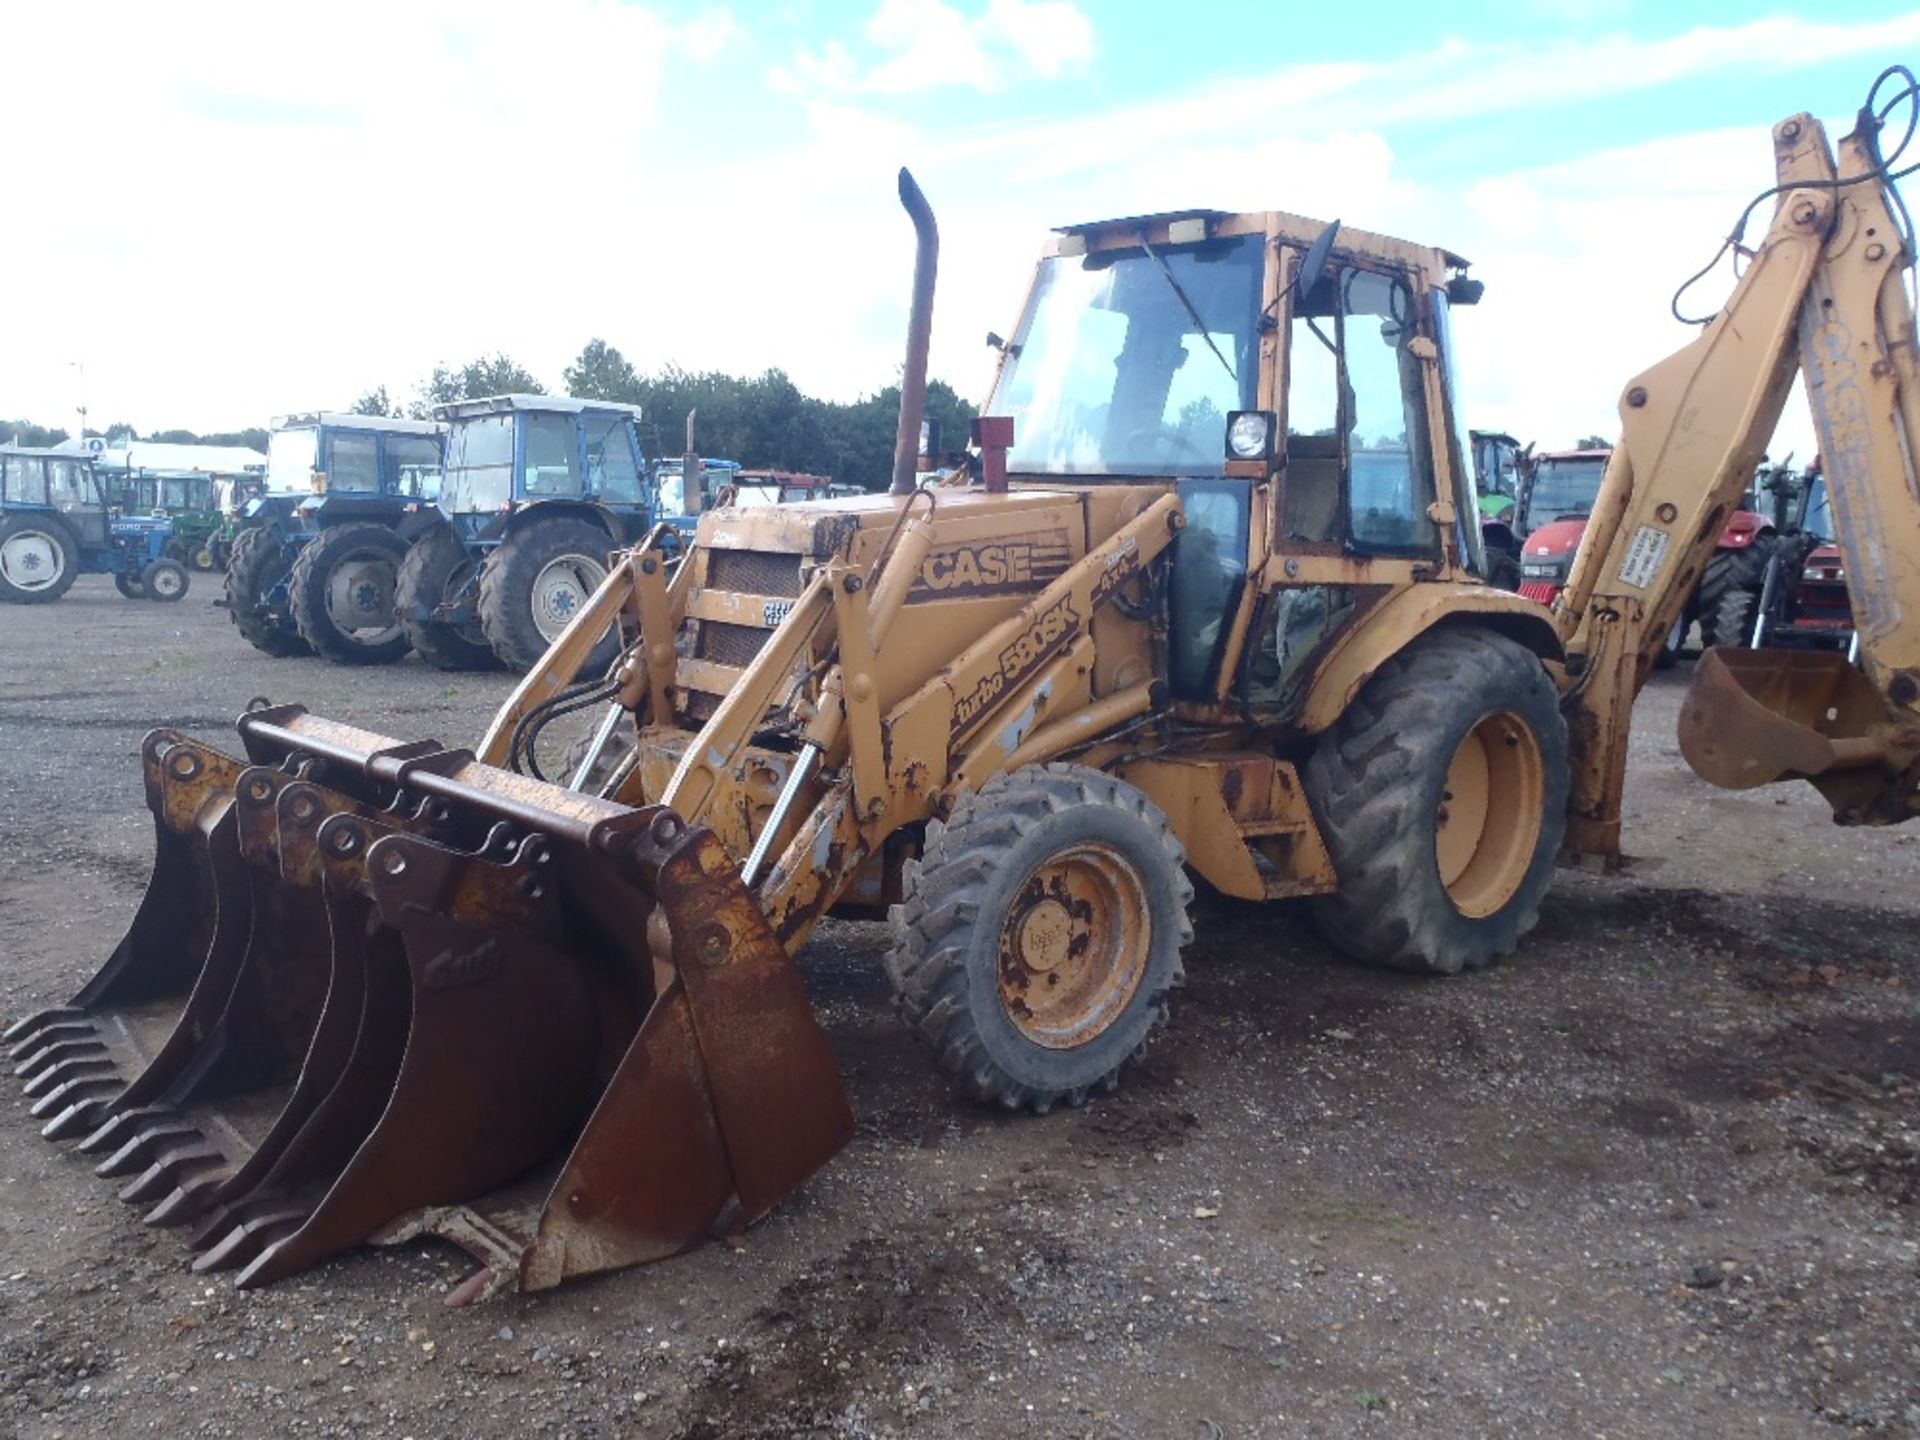 1992 Case 580k 4wd Full Spec Digger with 4 in 1 Bucket, Extender Rear Hoe - Image 2 of 4